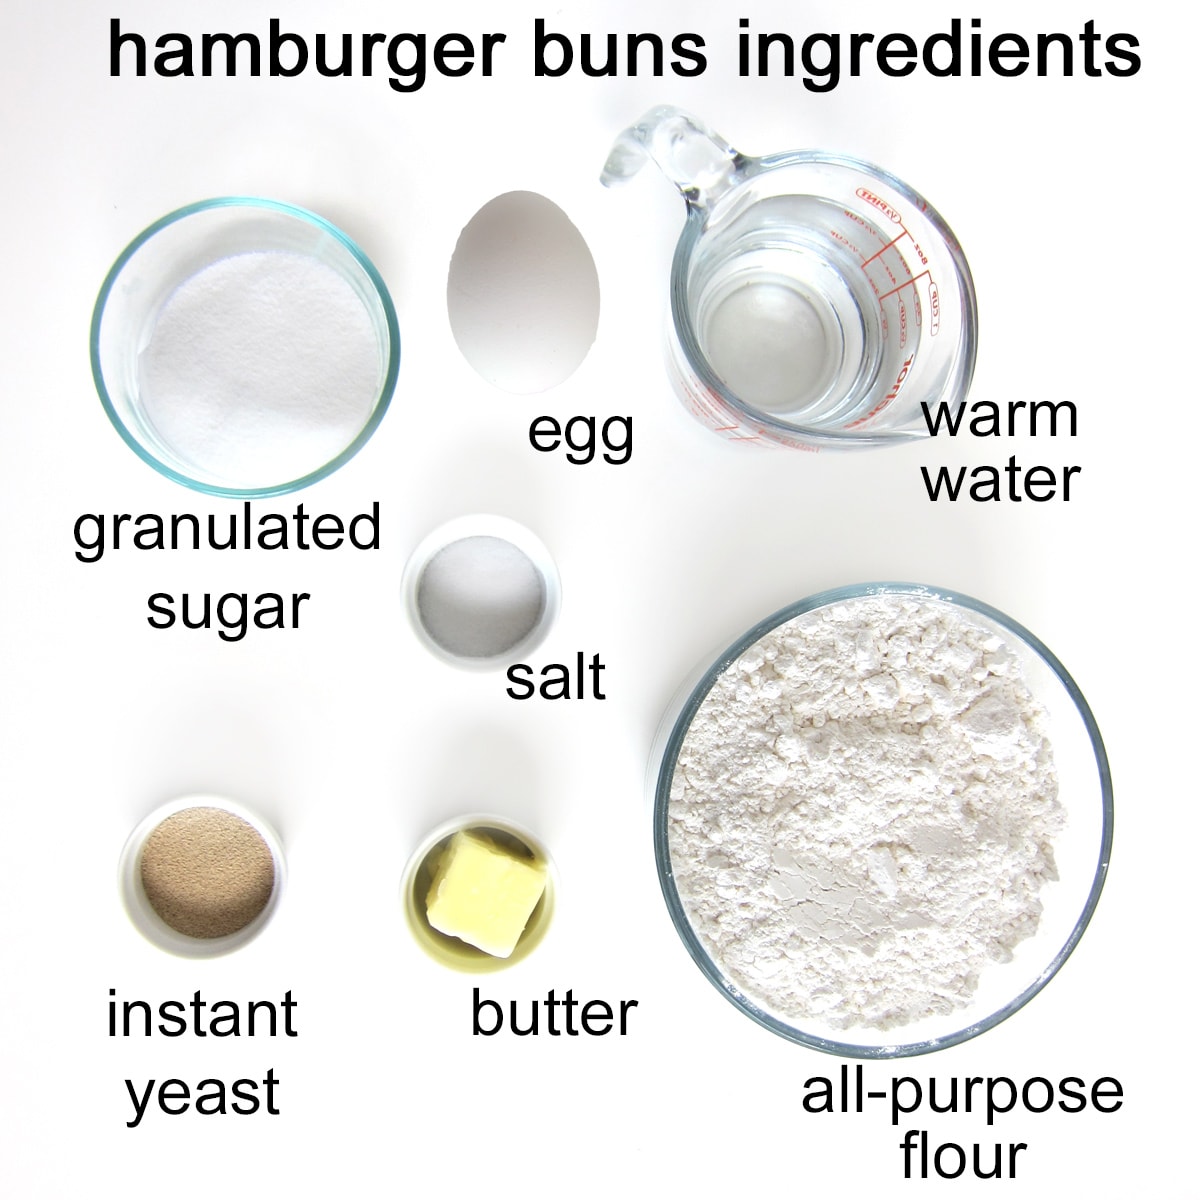 hamburger buns ingredients including sugar, egg, salt, yeast, butter, flour, and water.